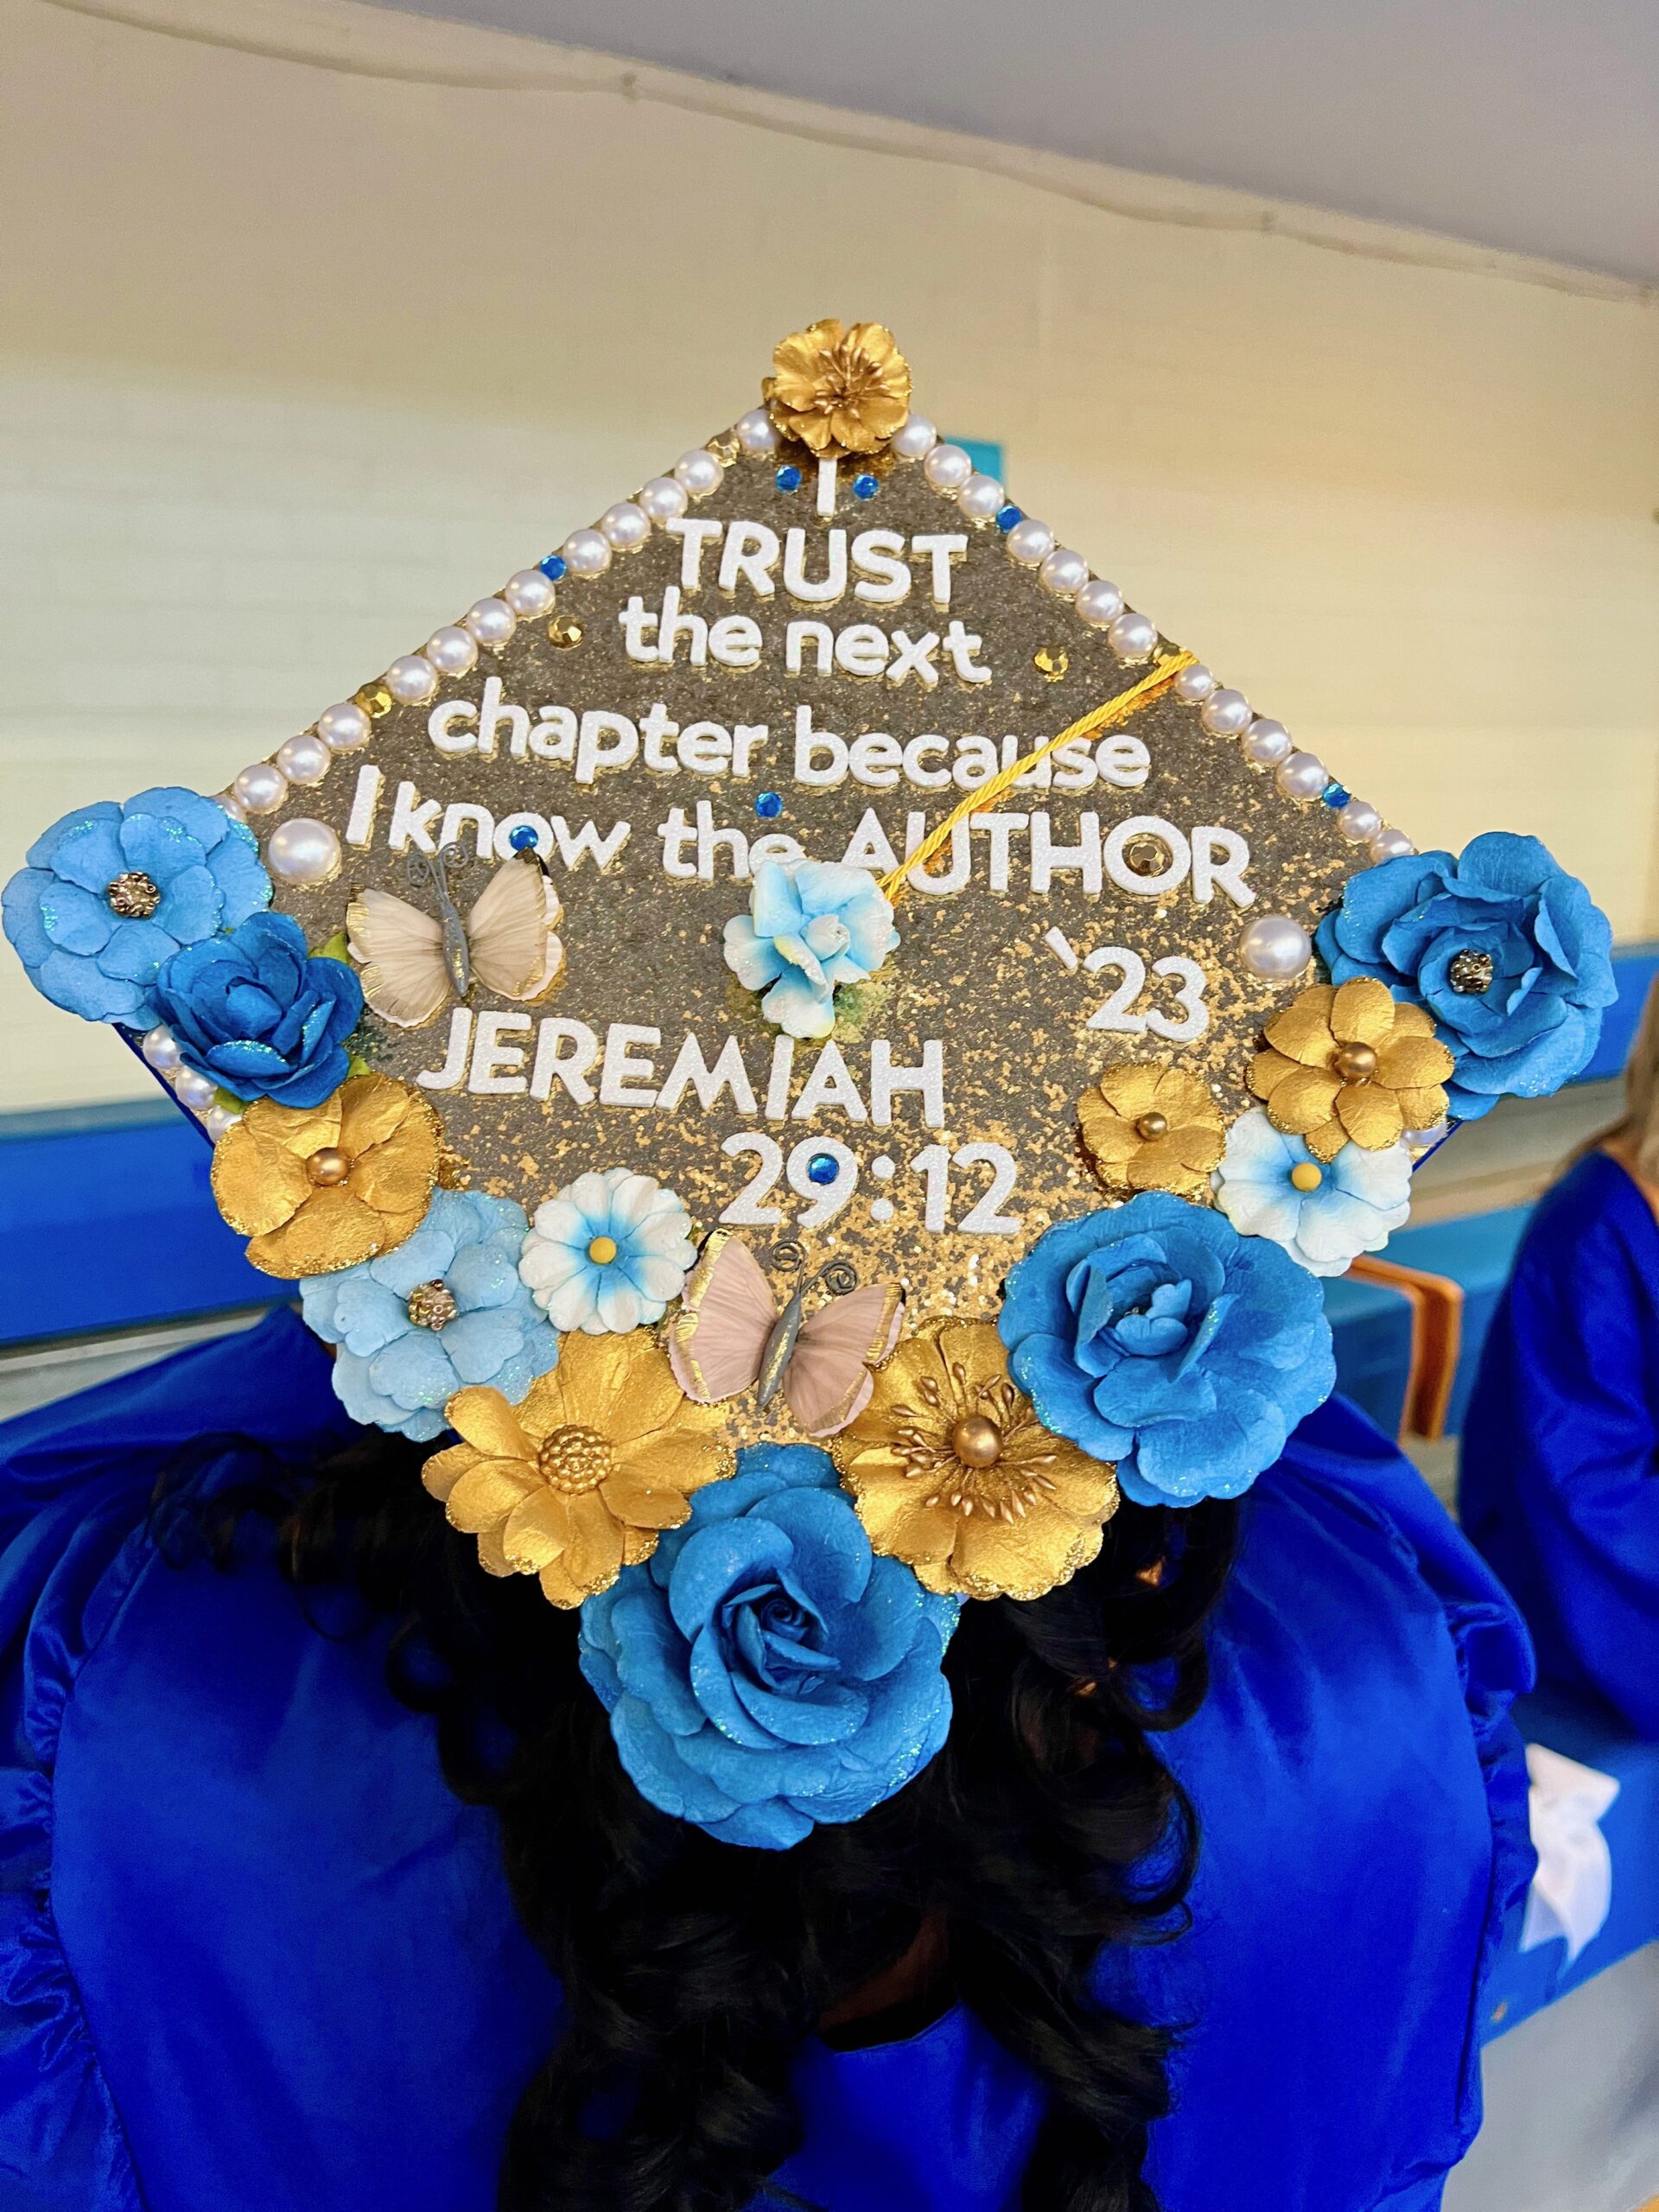 Decorated mortarboard reading "I trust the next chapter because I know the author. '23 Jeremiah 29:12"